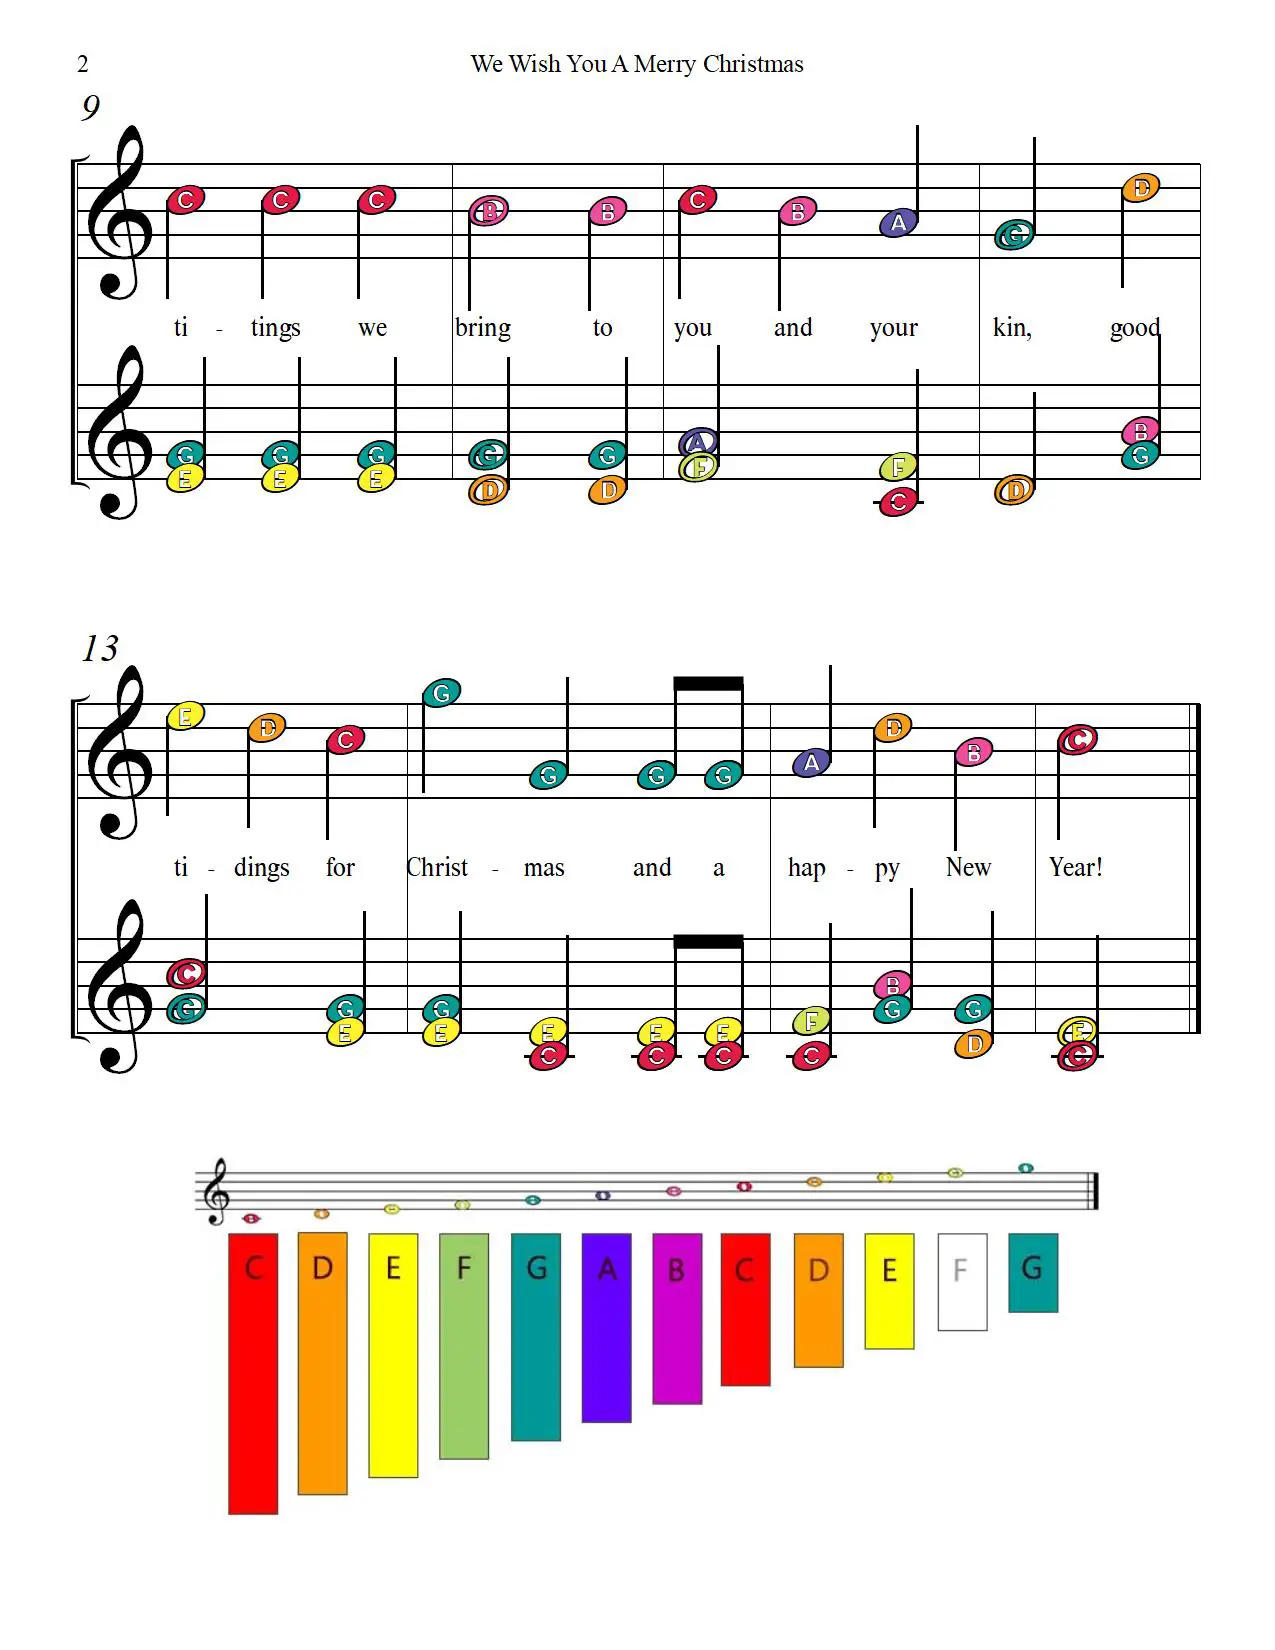 We wish you a merry Christmas free boomwhackers handbells chords sheet music color notes chart pdf p.2